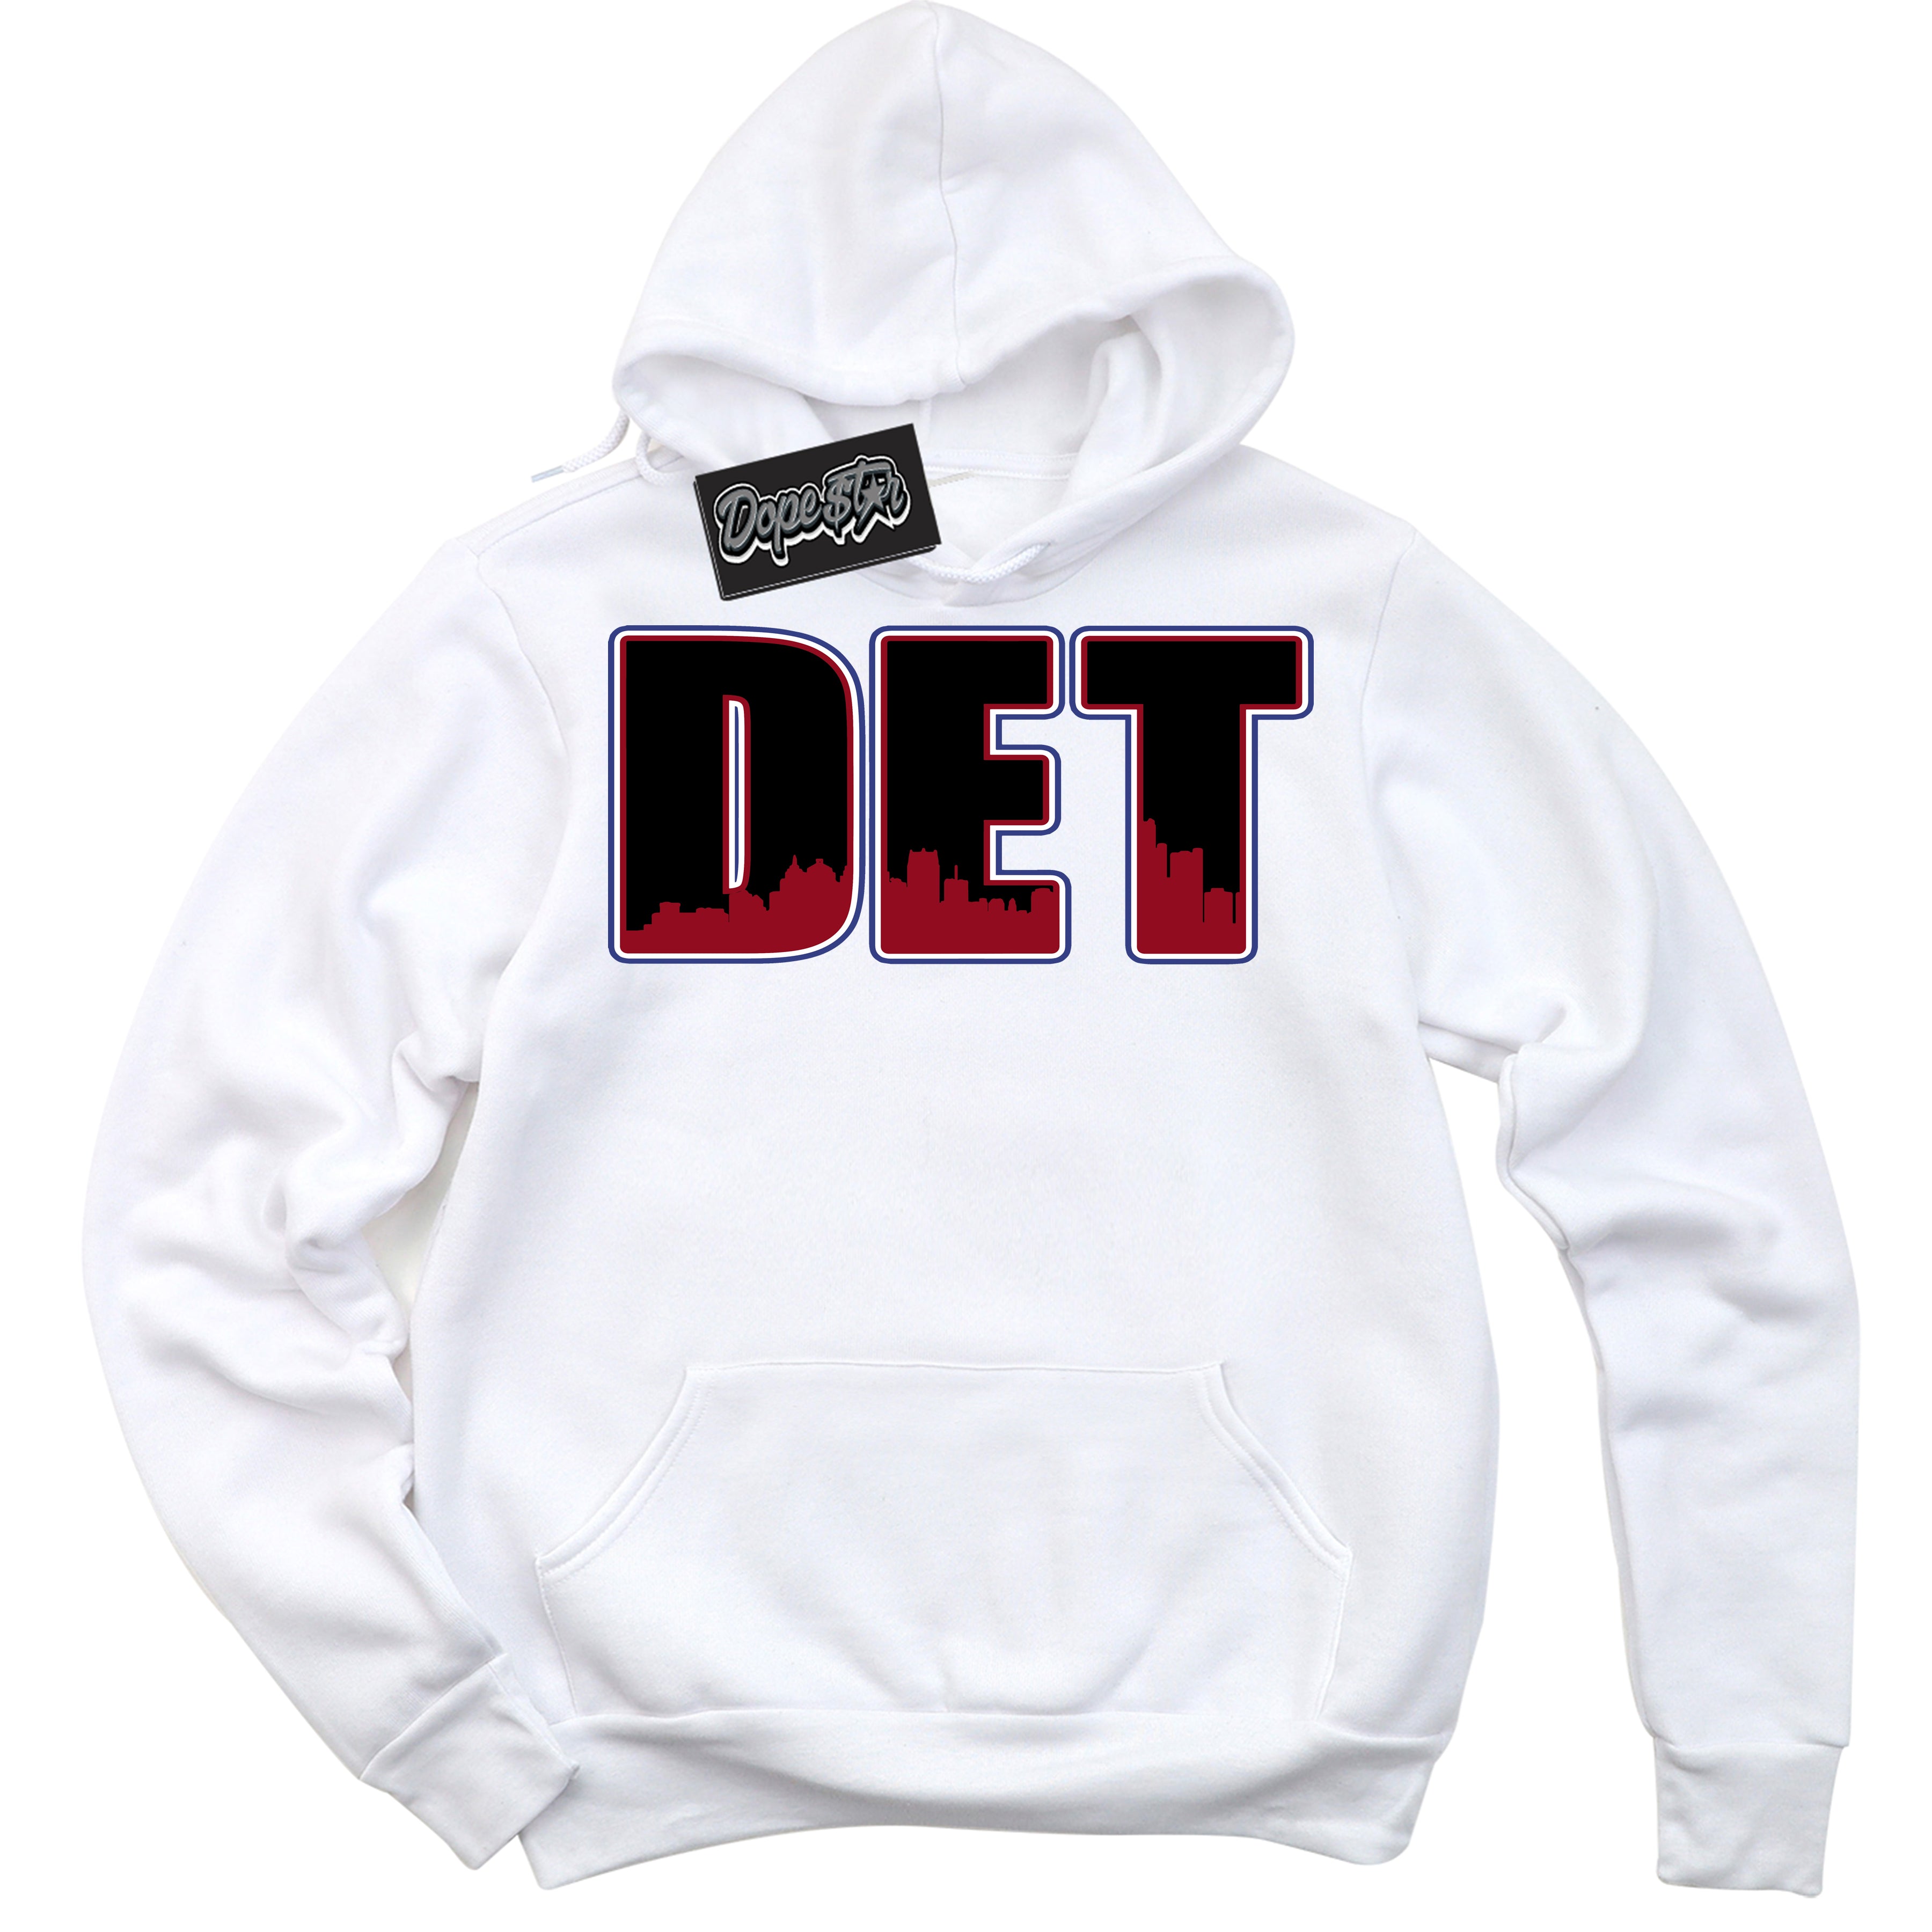 Cool White Hoodie with “ Detroit ”  design that Perfectly Matches Playoffs 8s Sneakers.